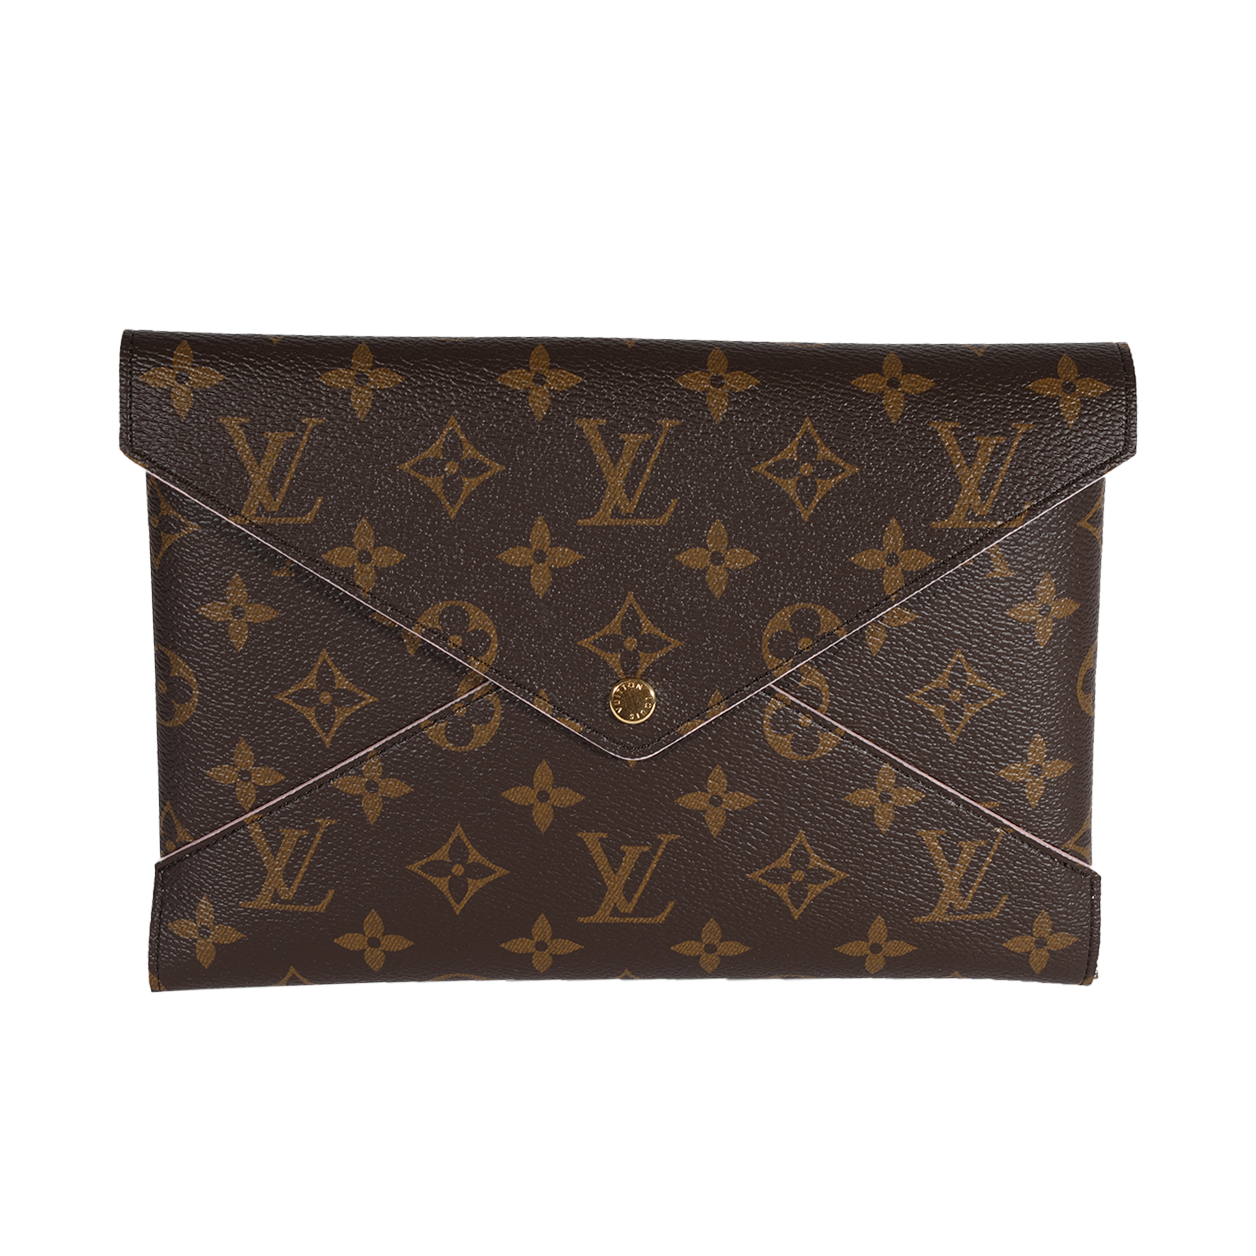 Louis Vuitton - Authenticated Kirigami Clutch Bag - Cloth Black for Women, Never Worn